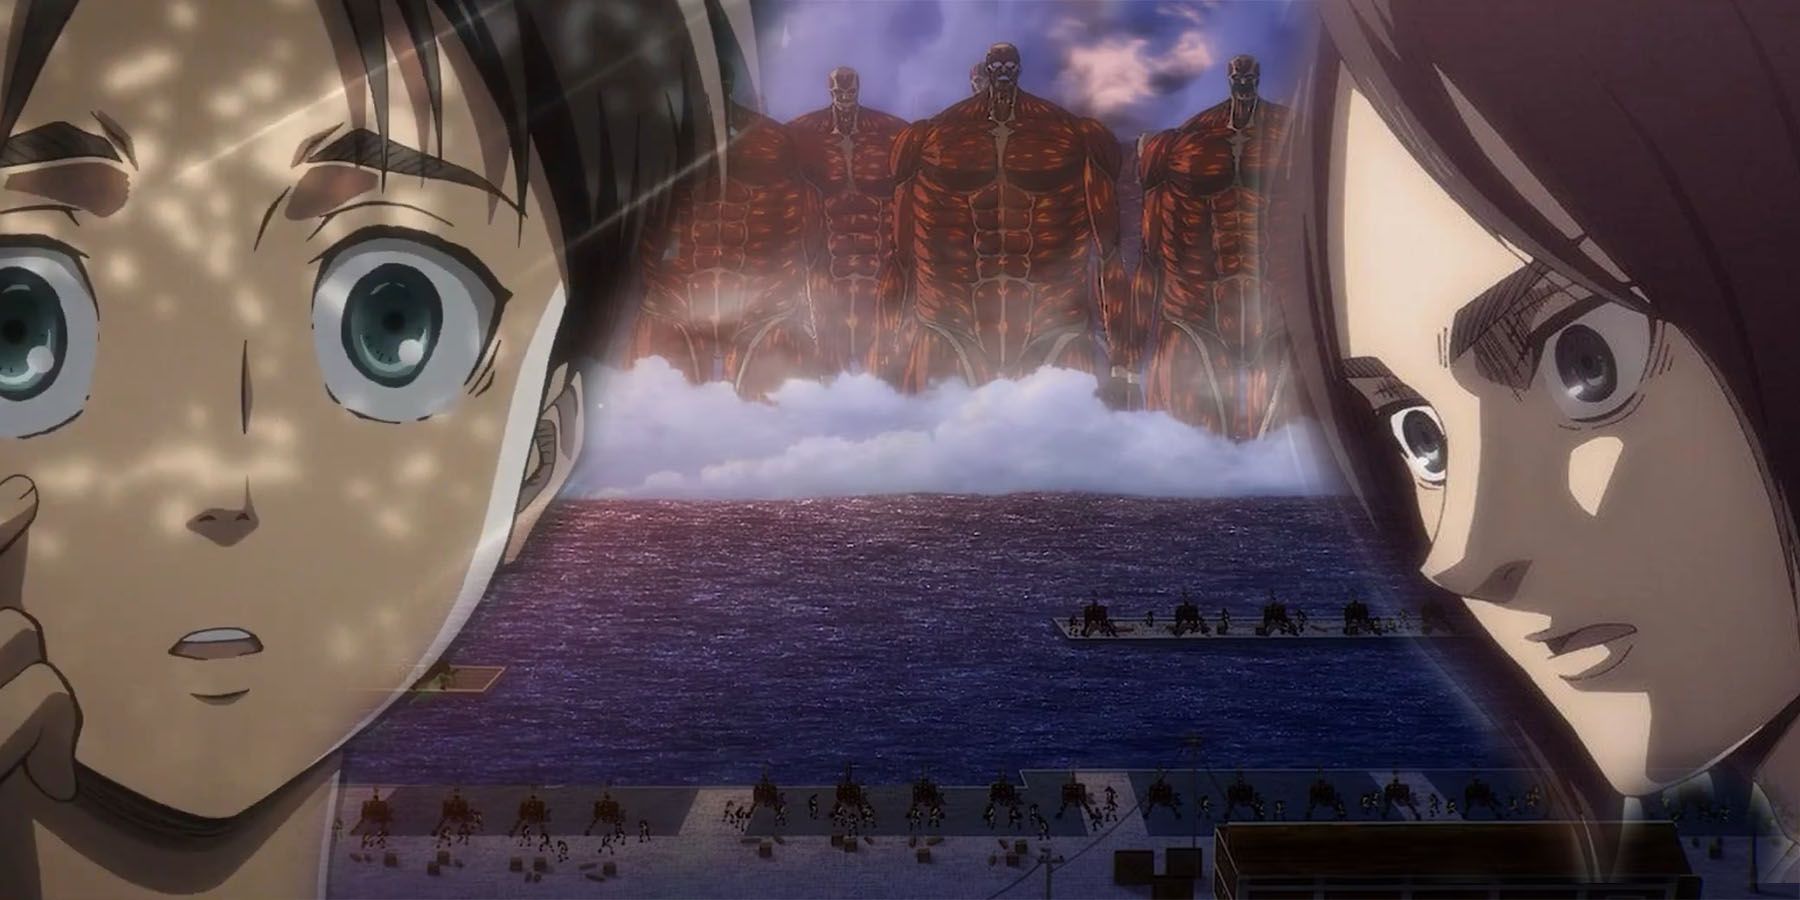 January 7 is Going to Be a Big Day for Attack on Titan Fans